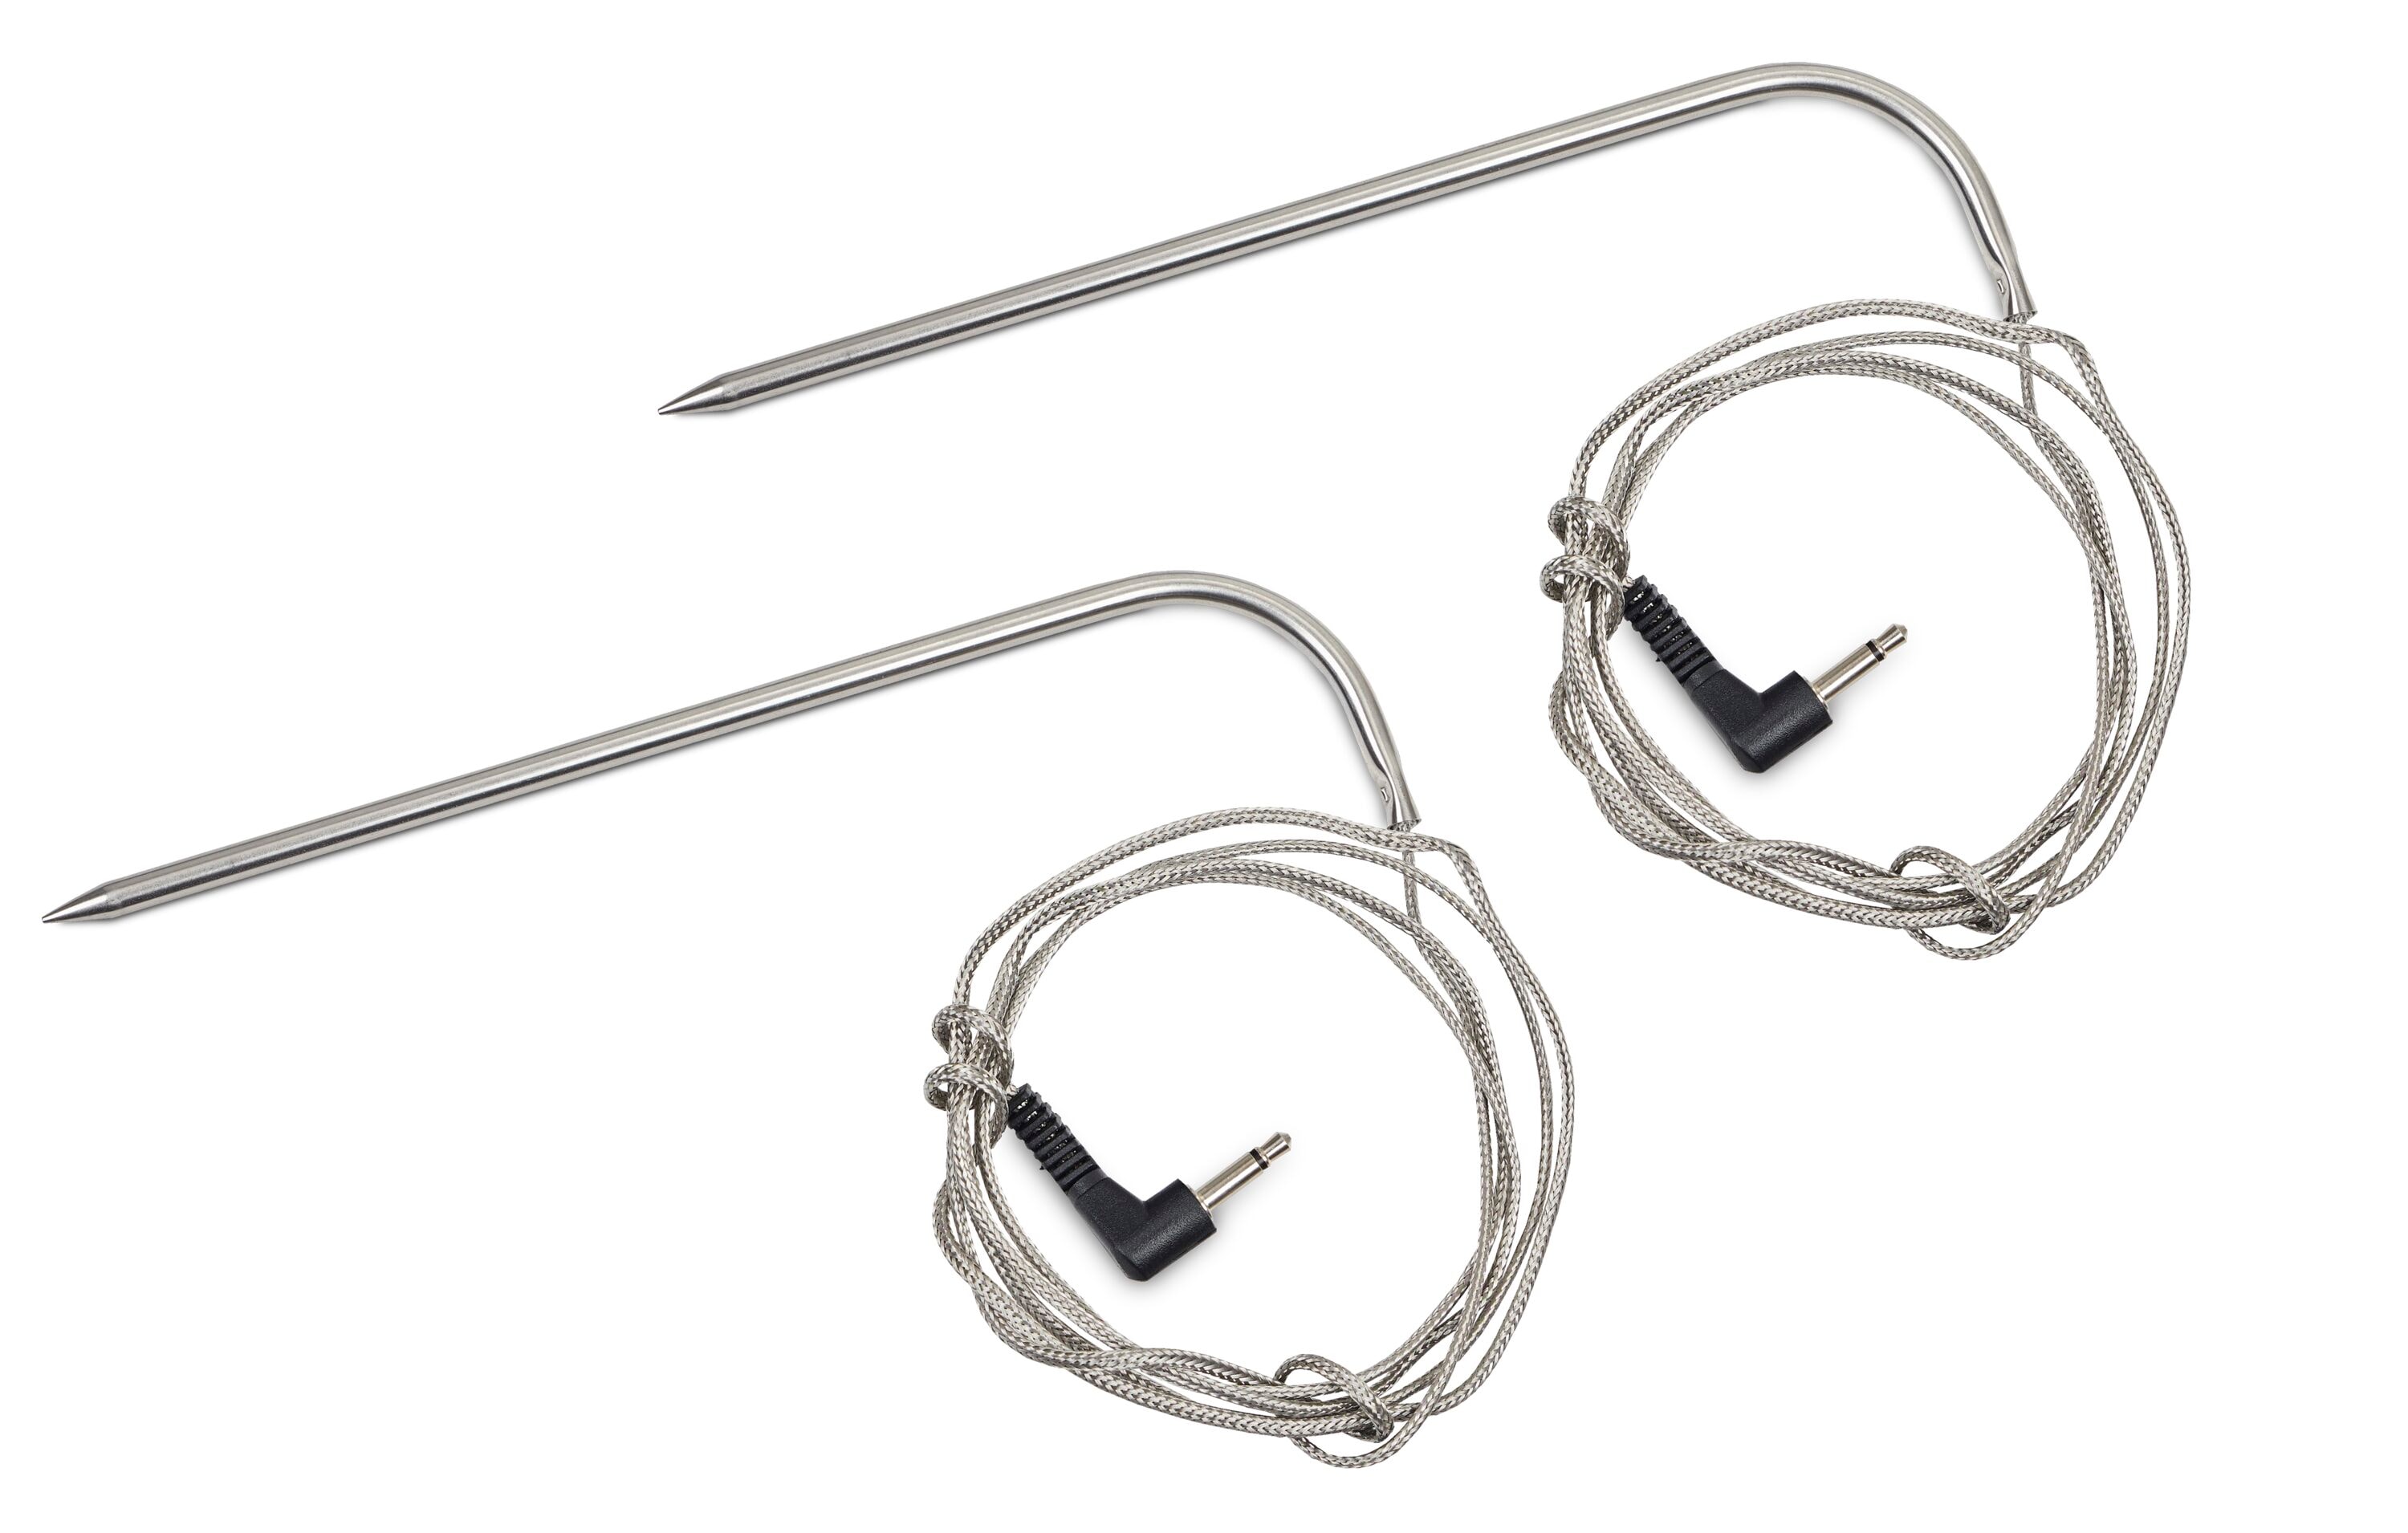 2 Pack Replacement Meat Probe for Traeger Pellet Grill Smokers Parts, 3.5mm  Plug Probe Replacement Temperature Meat Probe with 2 Stainless Steel Probe